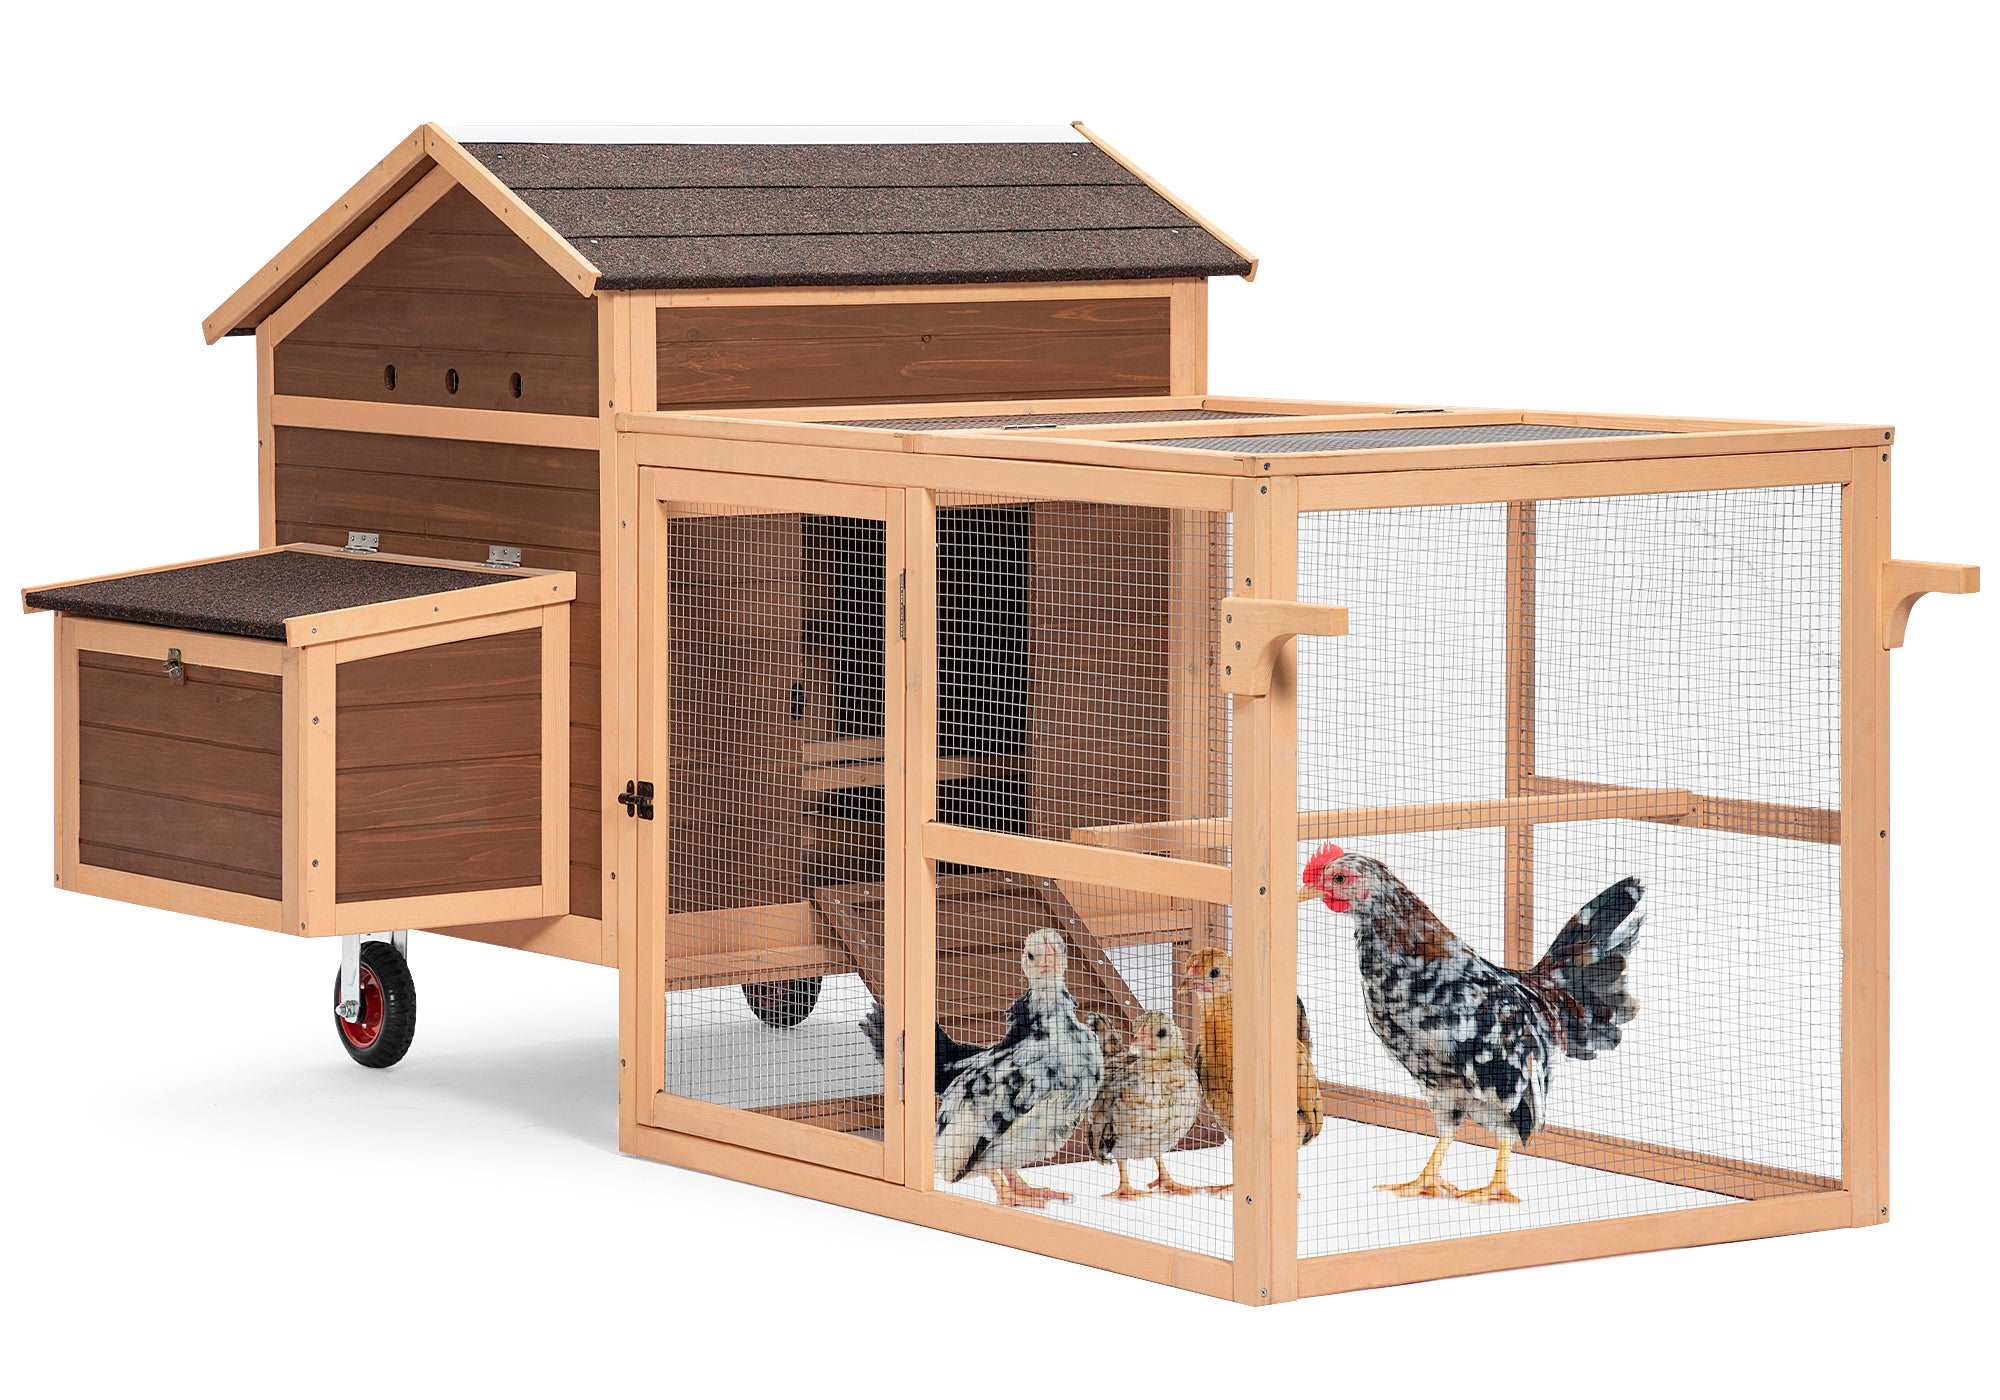 petsfit-large-chicken-coop-tractor-81-hen-house-outdoor-waterproof-poultry-cage-with-nesting-box-wheels-5-access-areas-pull-out-tray-for-easy-cleaning-01